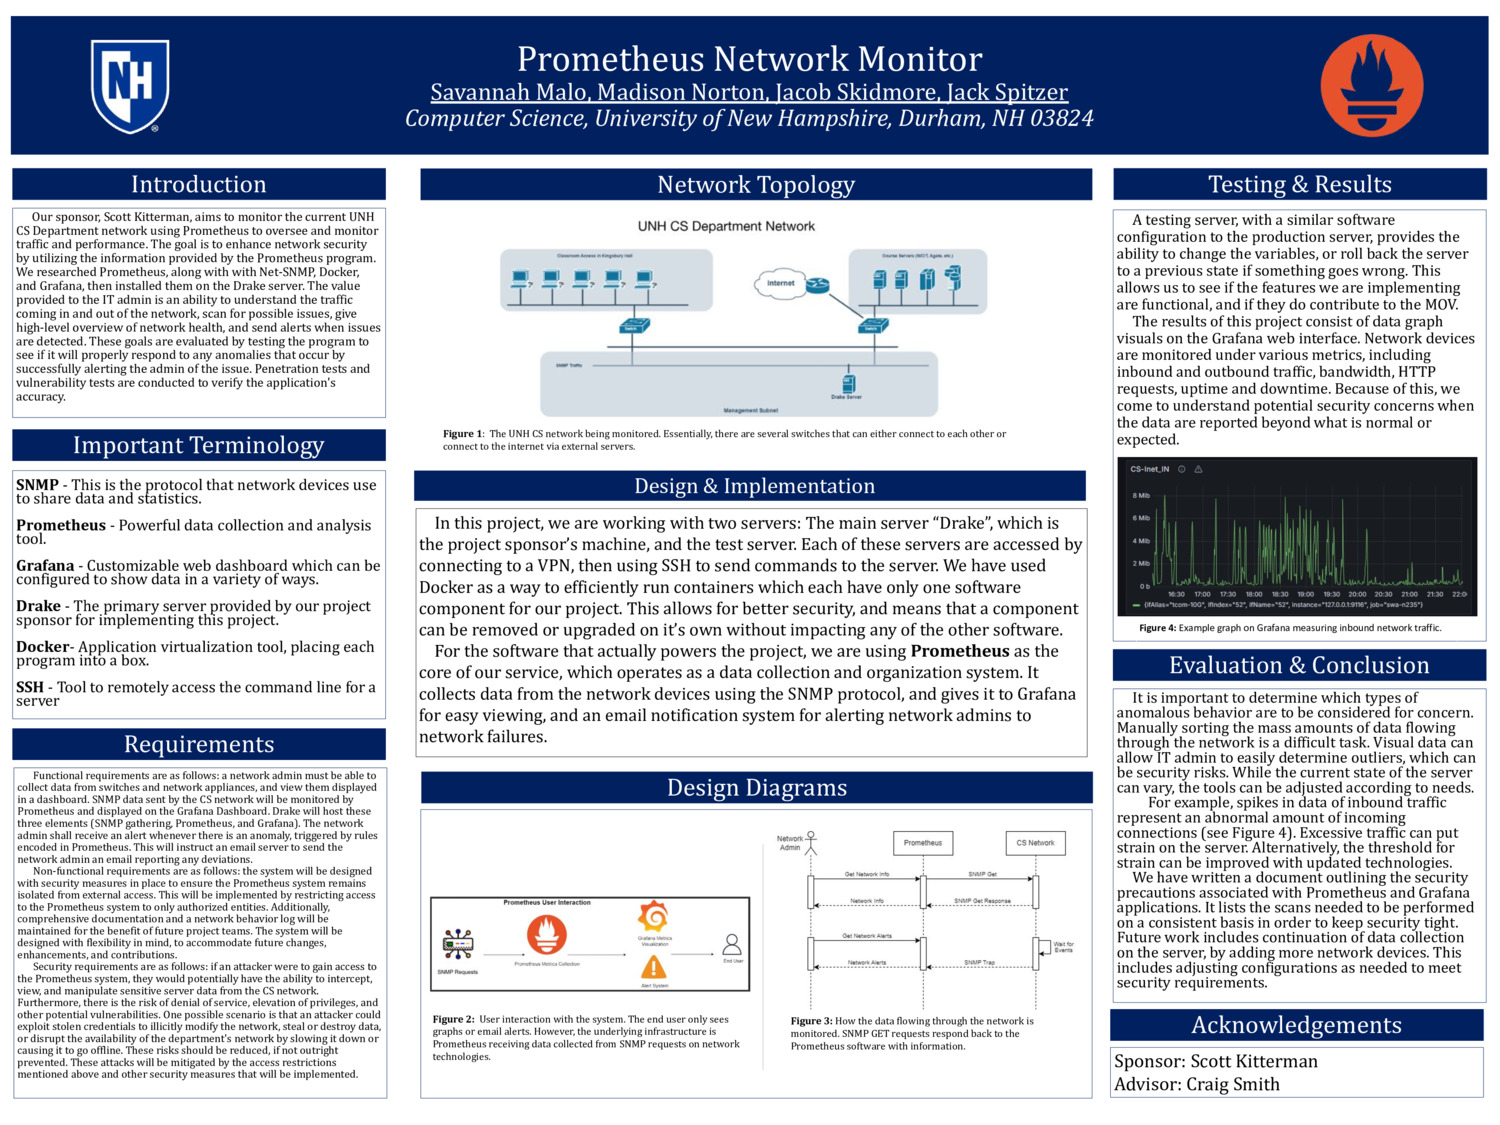 Prometheus Network Monitor by smm1195